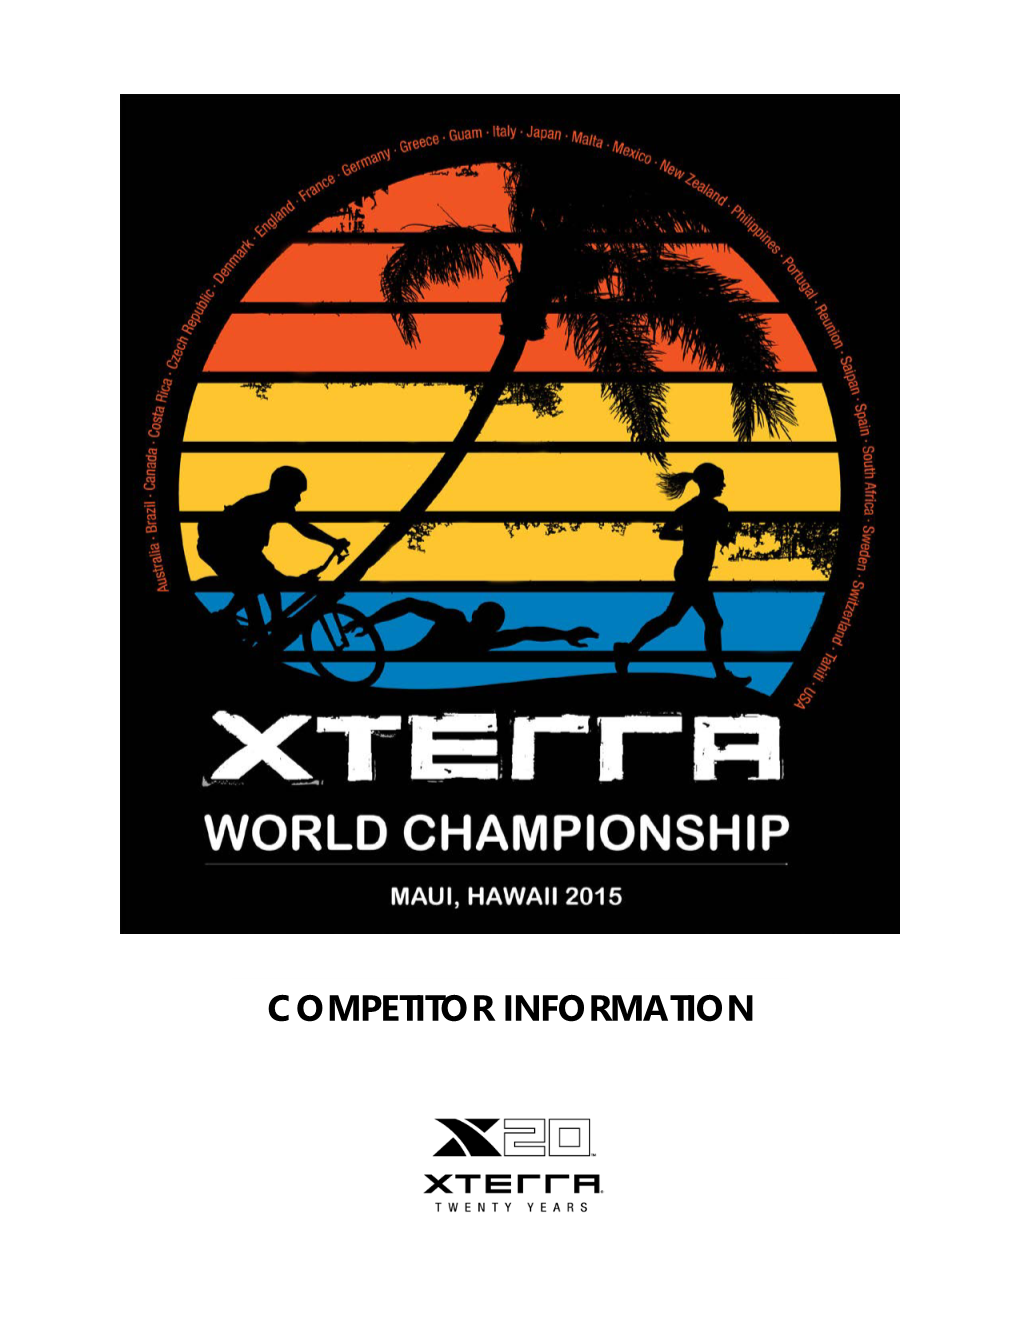 Competitor Information